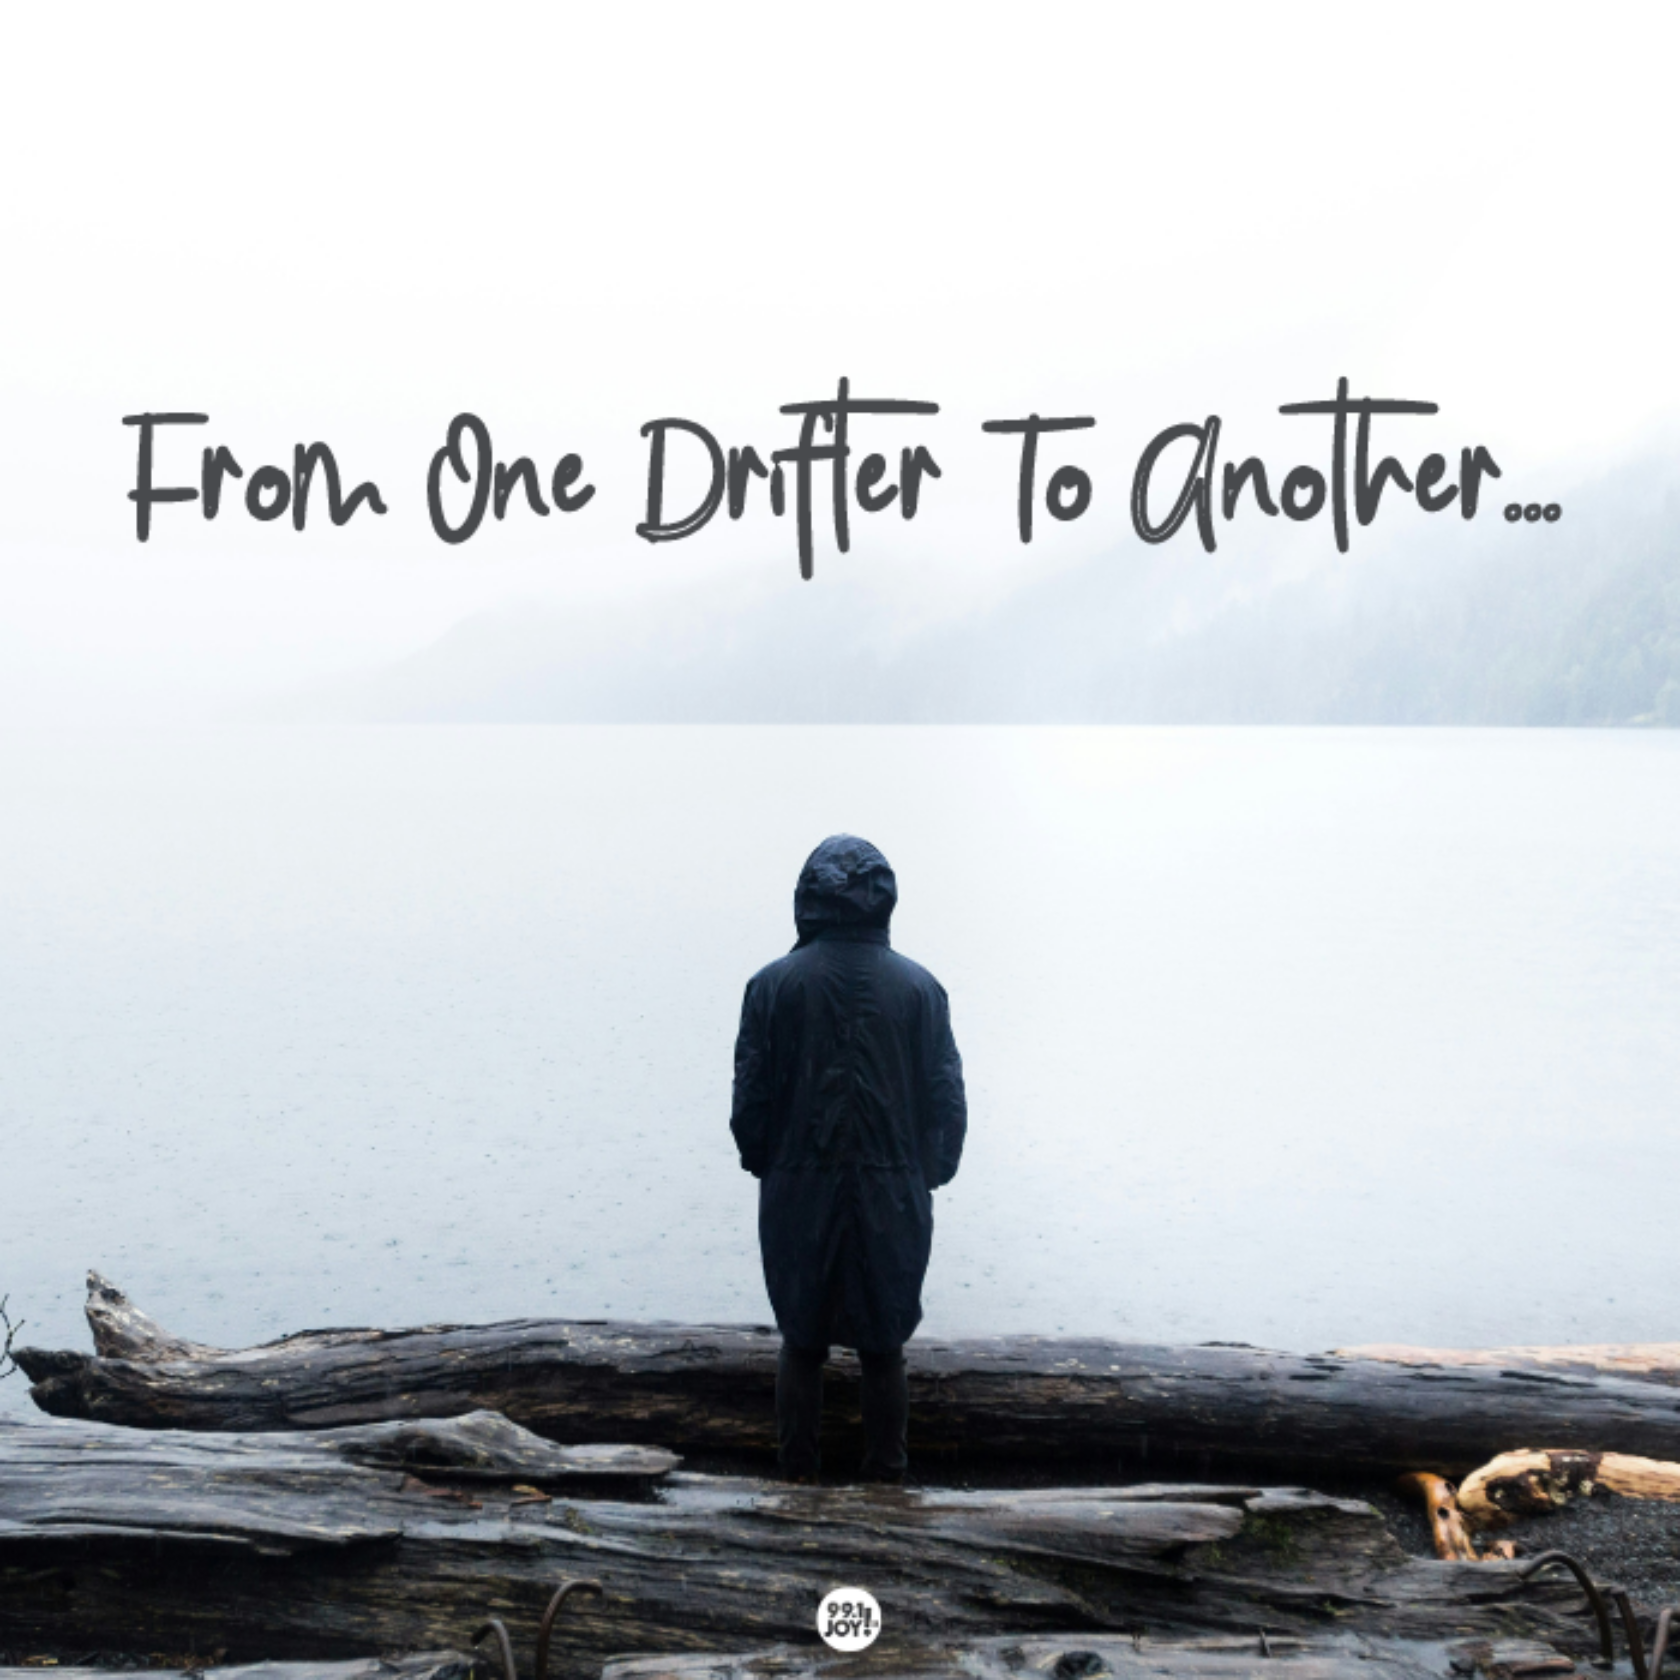 From One Drifter To Another…